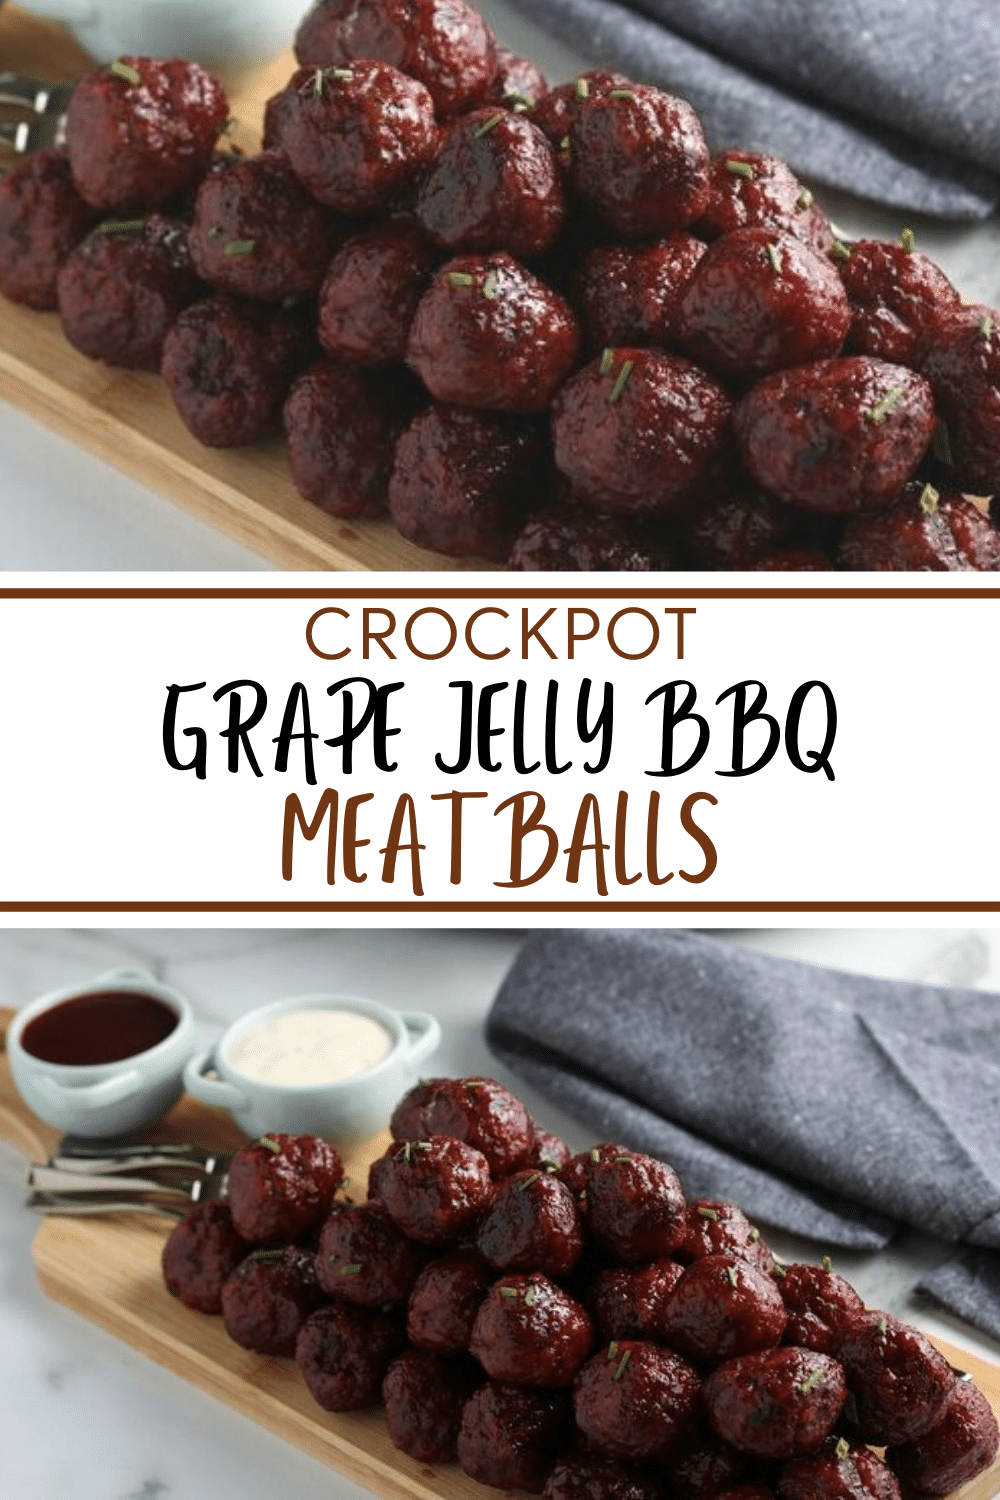 Crockpot Grape Jelly BBQ Meatballs are a simple appetizer with only 3 ingredients. This is a slow cooker party recipe everyone will love. #meatballs #easyappetizers #crockpot via @wondermomwannab